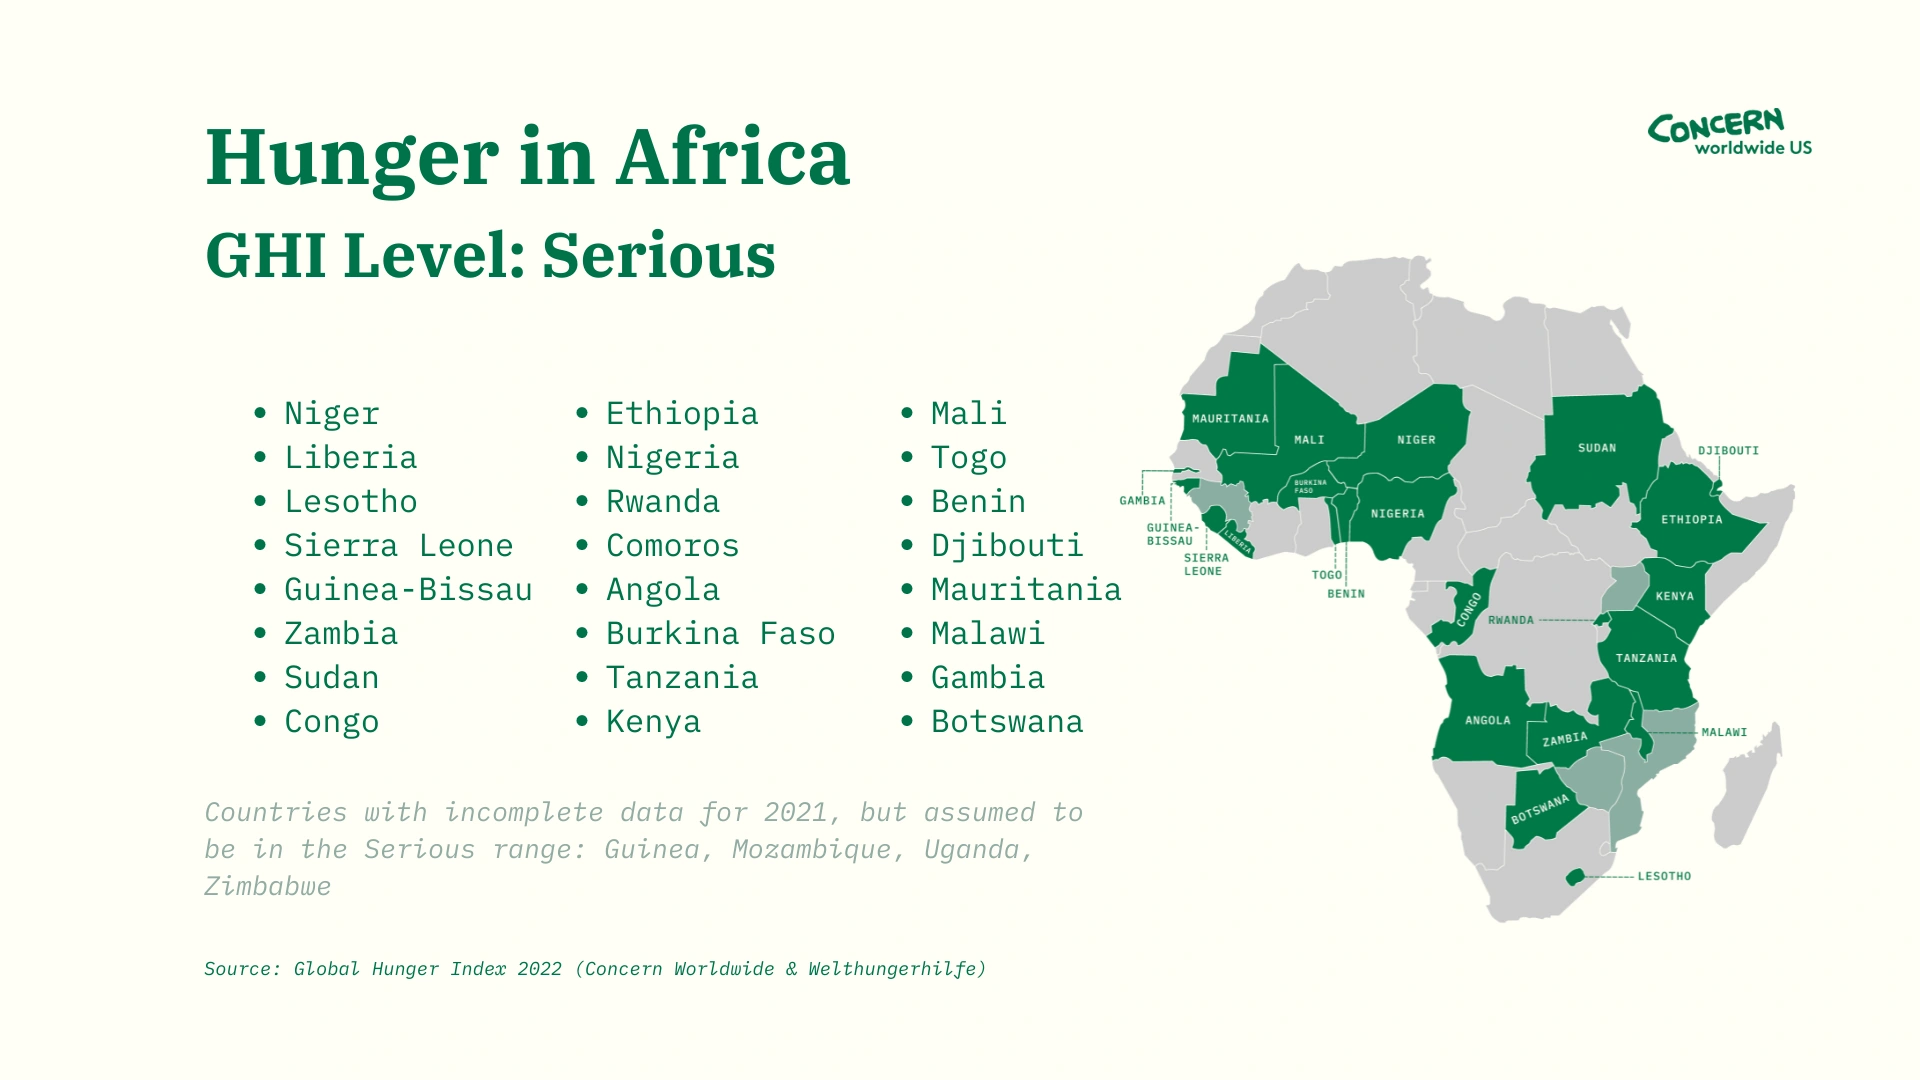 An infographic highlighting countries in Africa with serious levels of hunger.